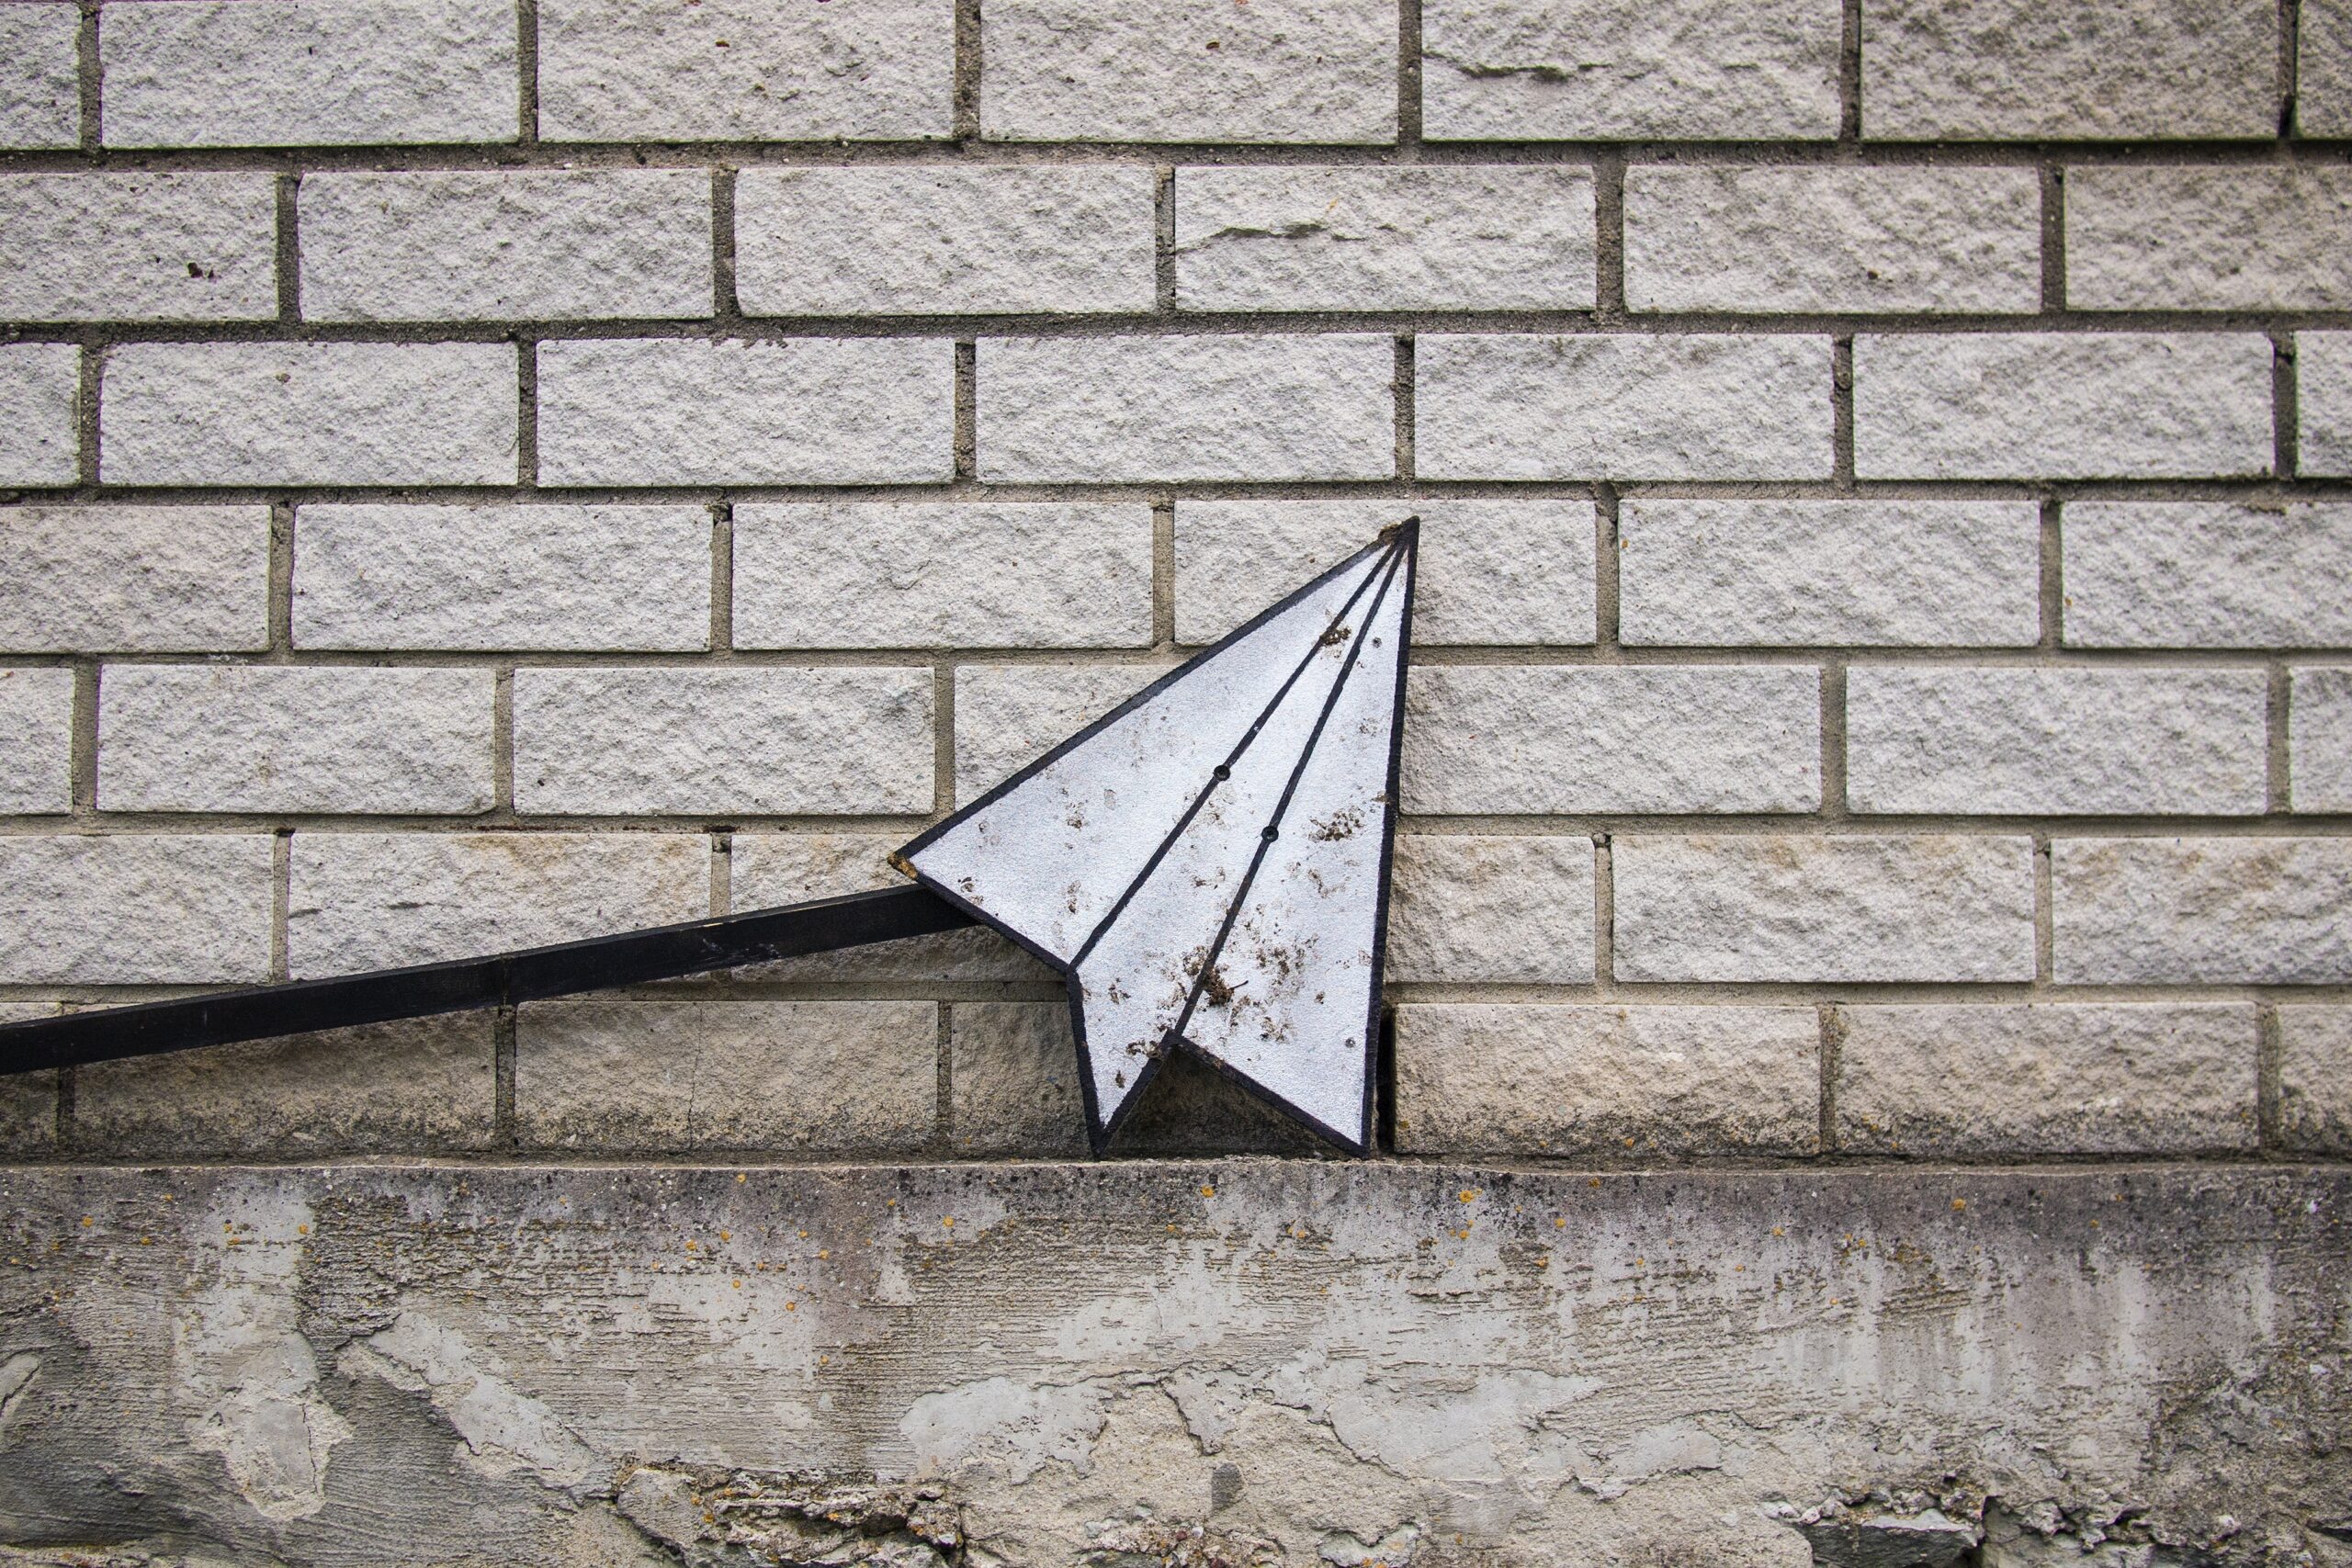 A paper aeroplane in front of a brick wall